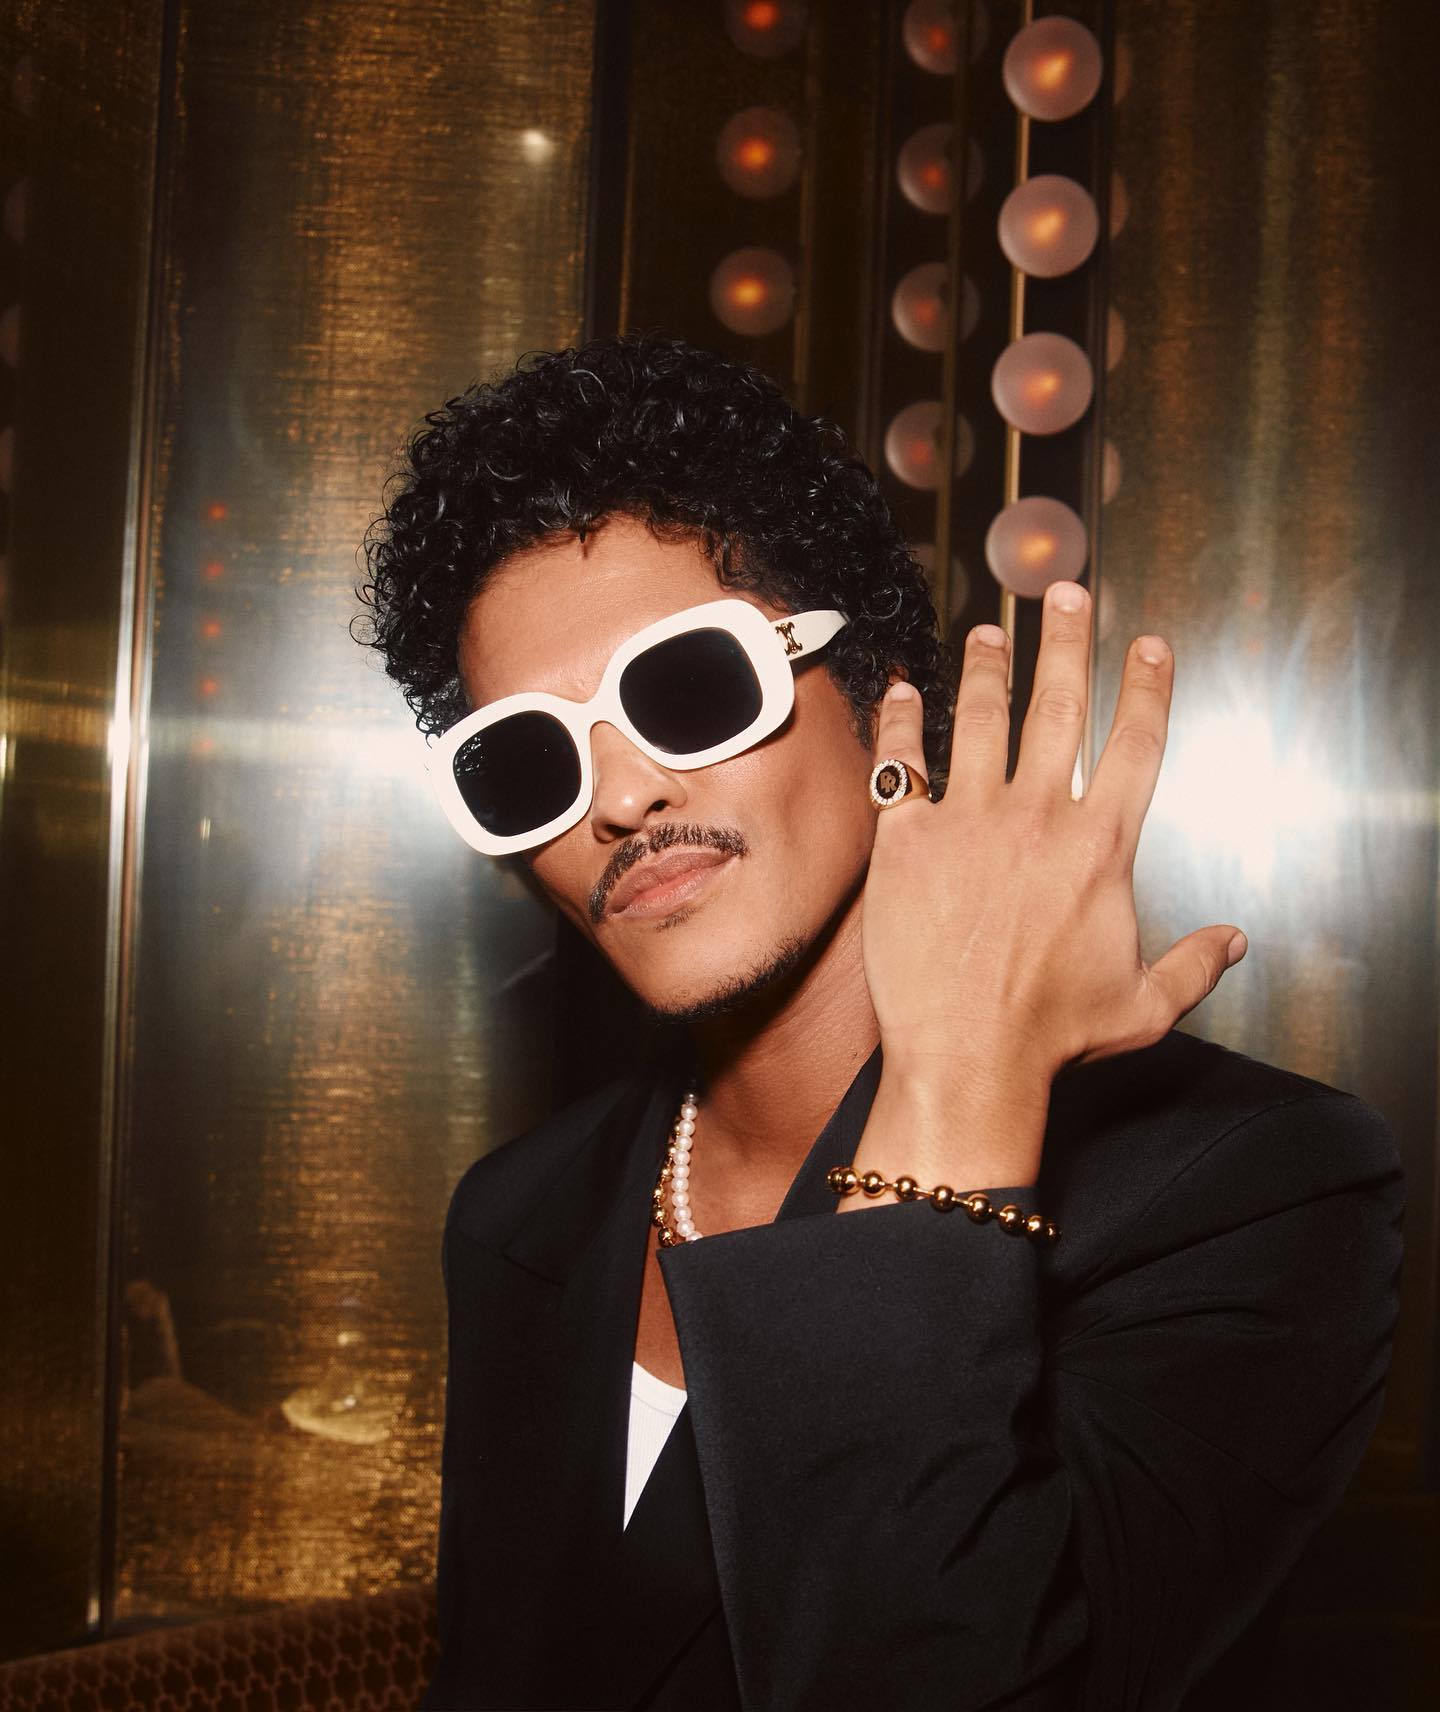 Last month, Tiffany & Co. posted a photo of Bruno rocking an 18K gold ring from the jewelry company